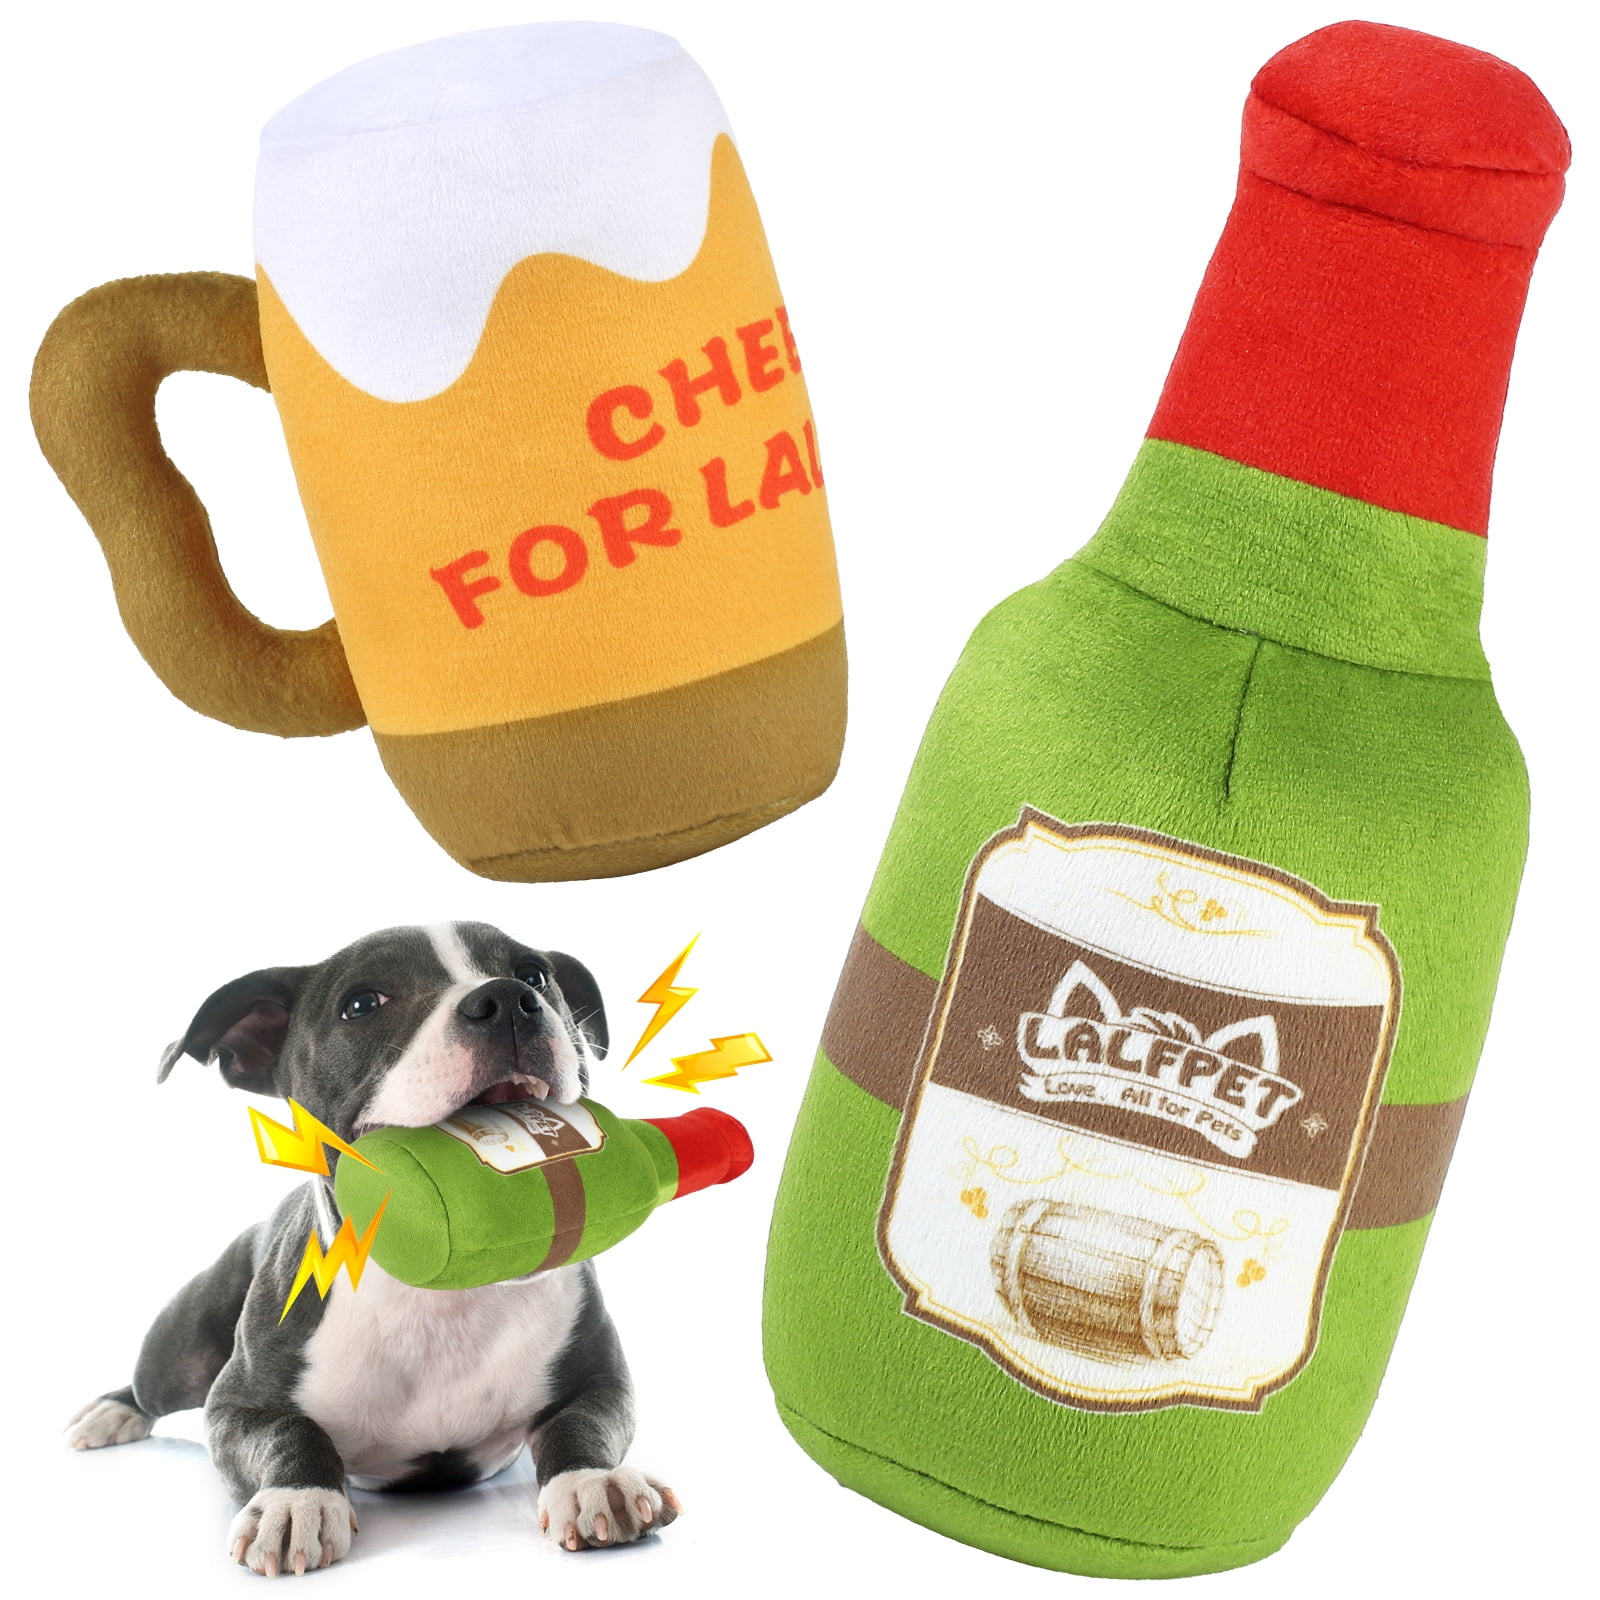 Funny Plush Toys For Dog Squeaky Beer Bottle Food Shape Dog Toy